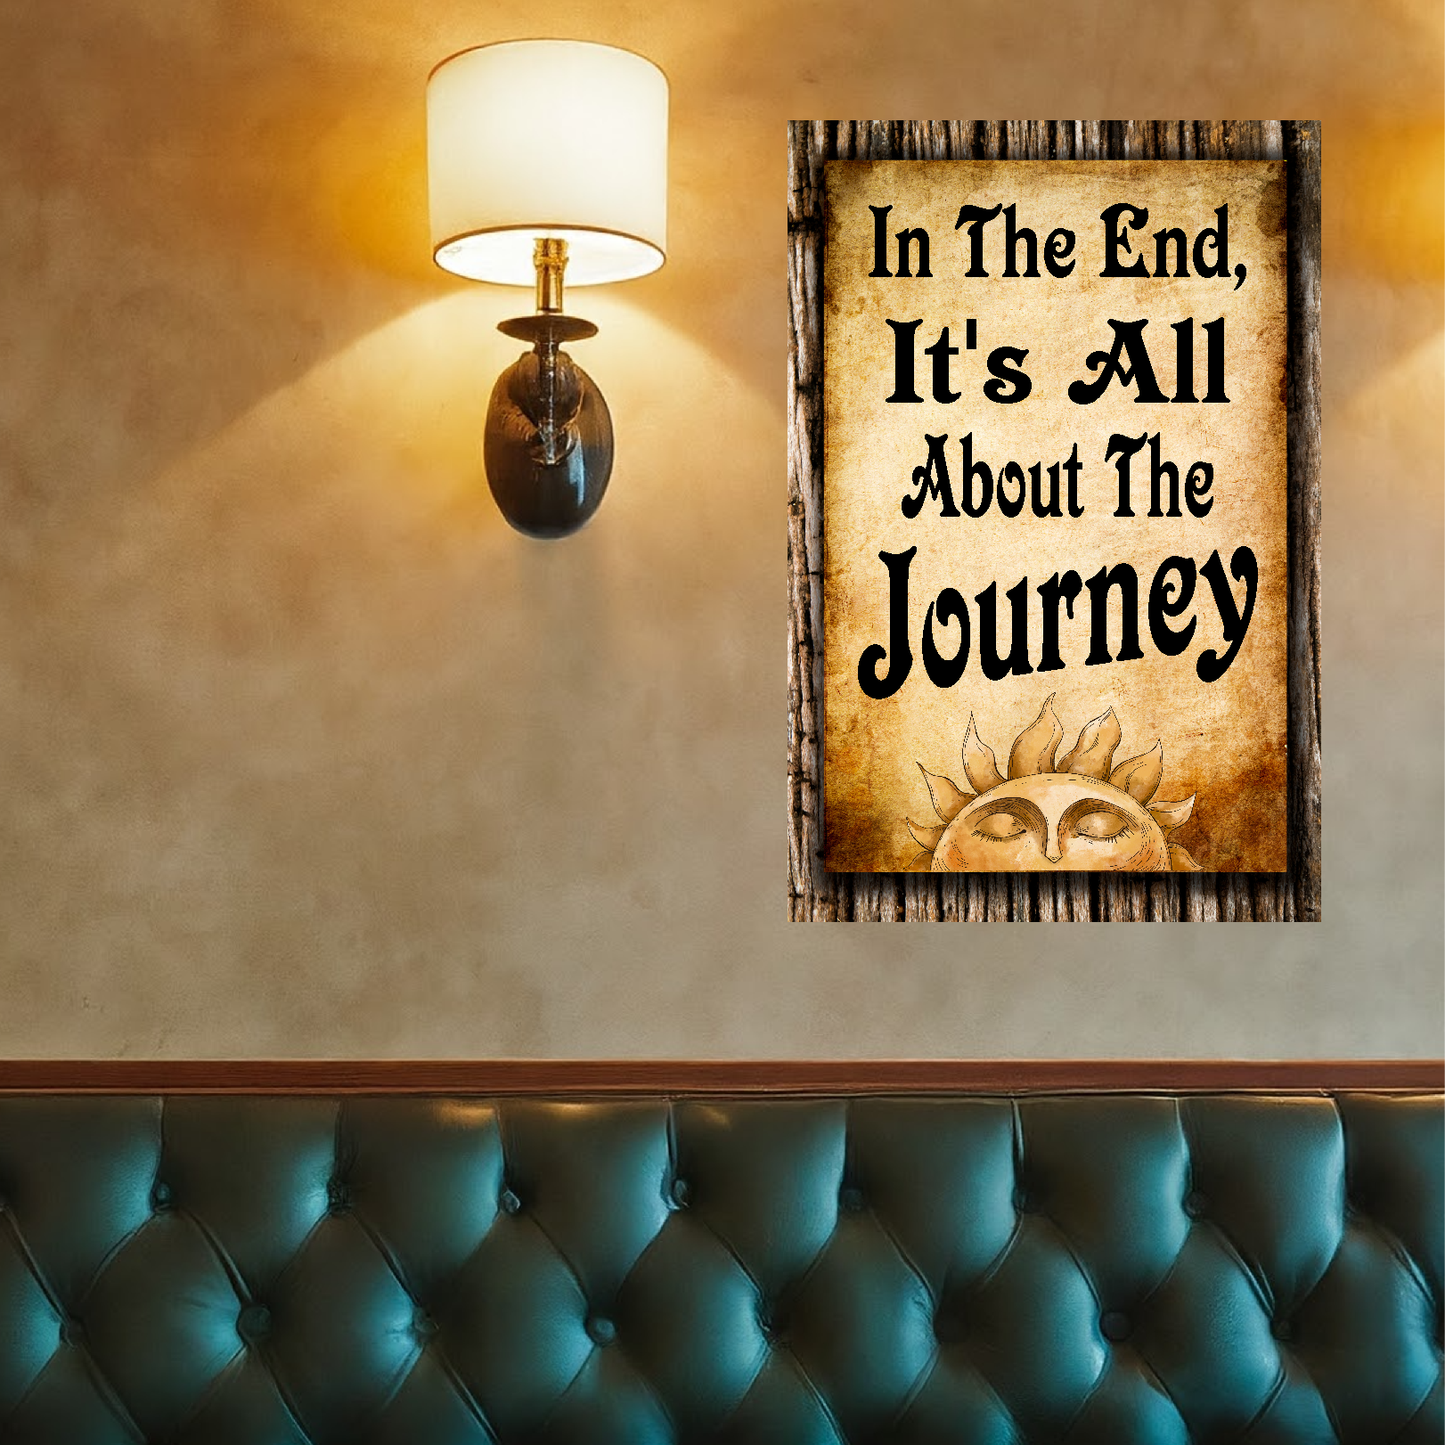 It's All About The Journey - 12" x 18" Vintage Metal Sign